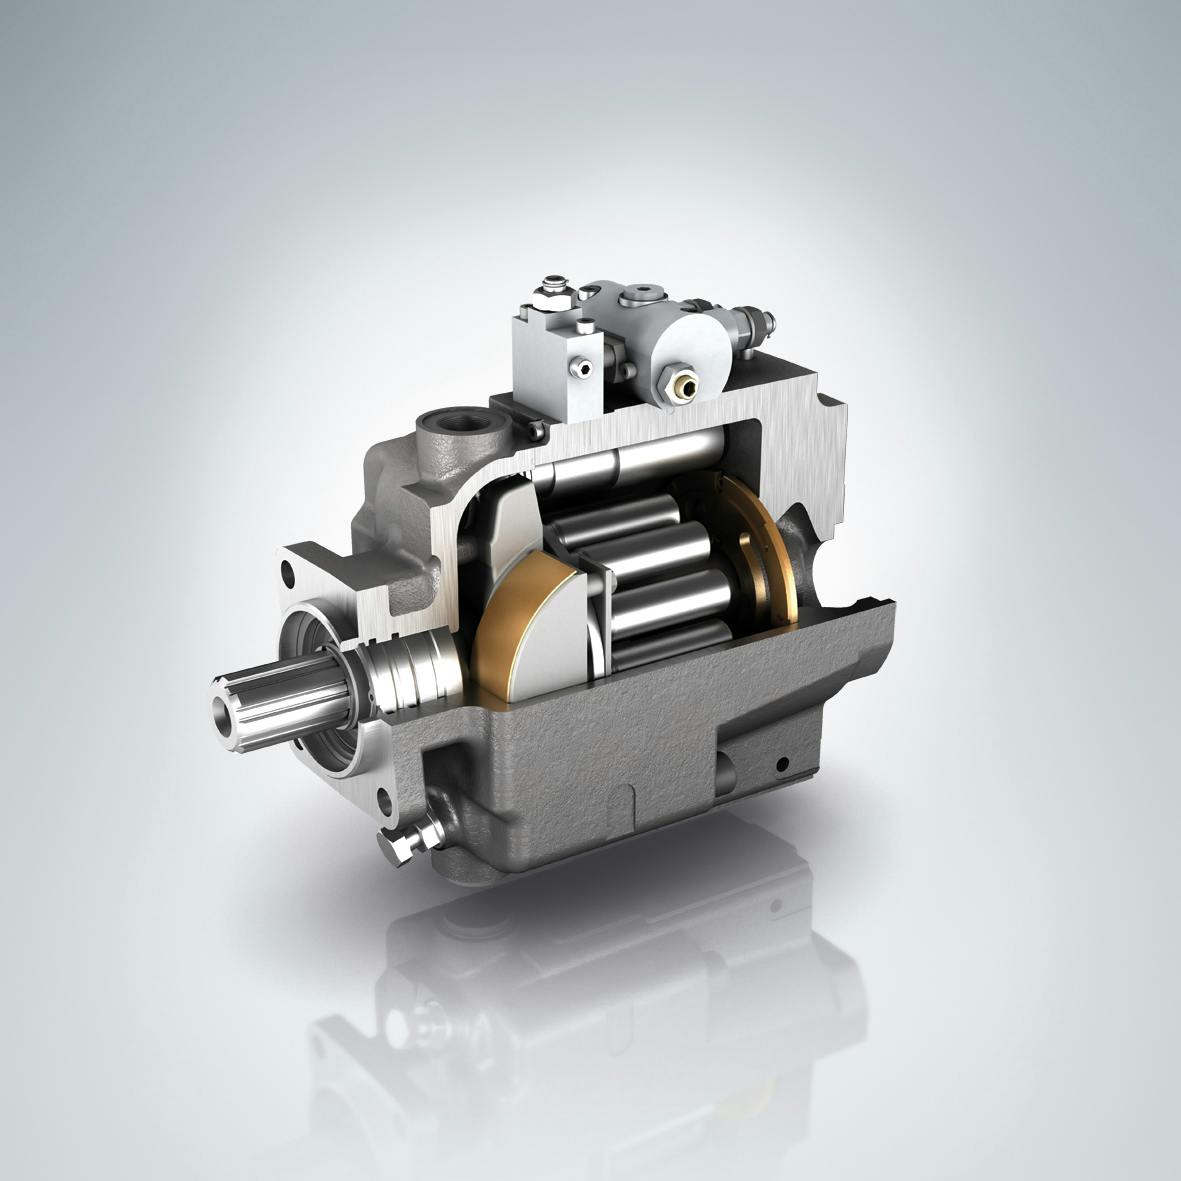 Hawe Hydraulics to Introduce New Size of Axial Piston Pump | Industry News